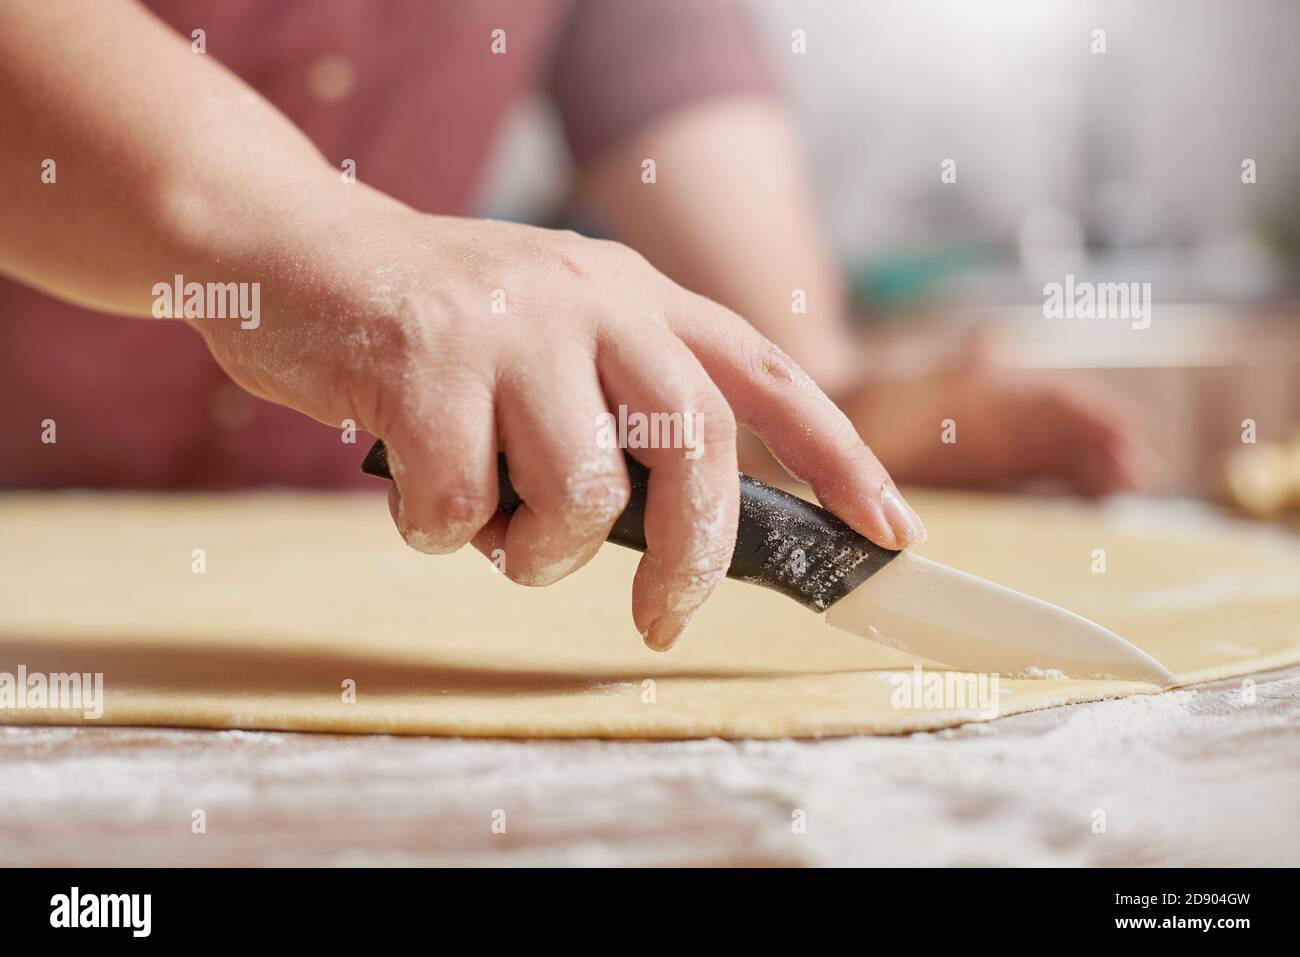 Closeup female hands cutting the raw dough with a knife Stock Photo